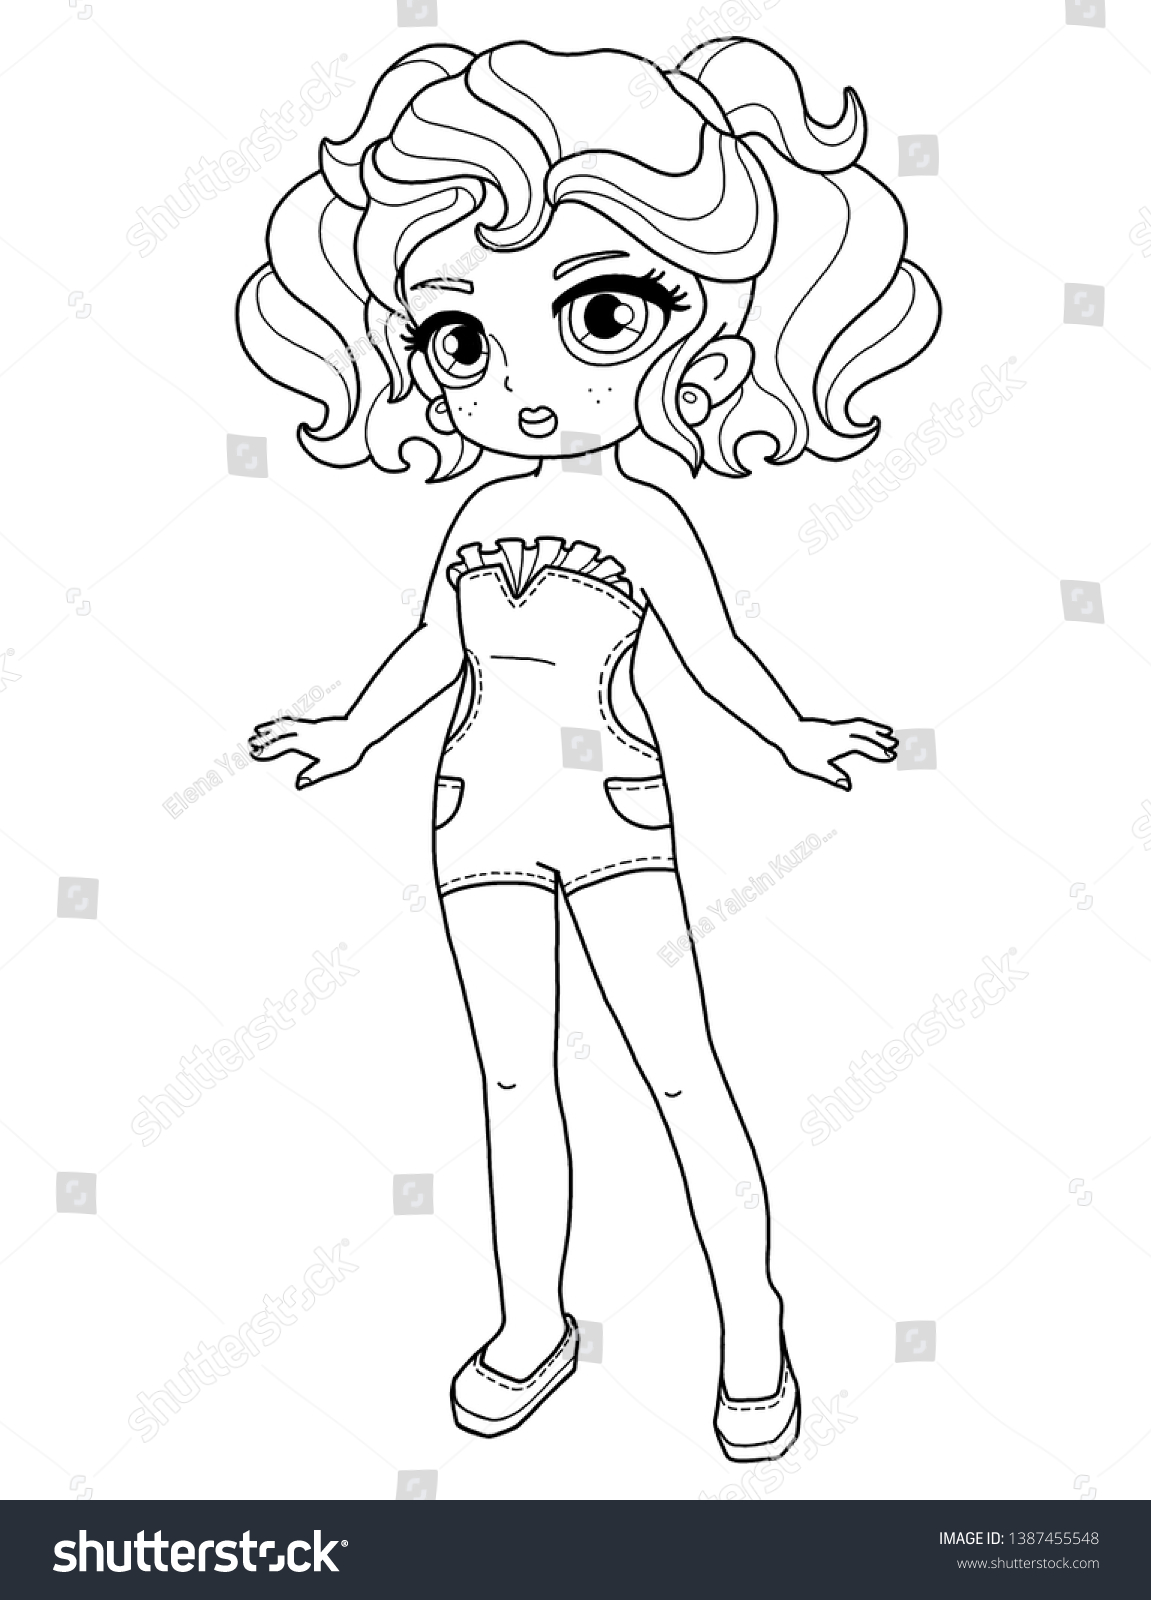 530  Coloring Pages Dress Up  Latest Free